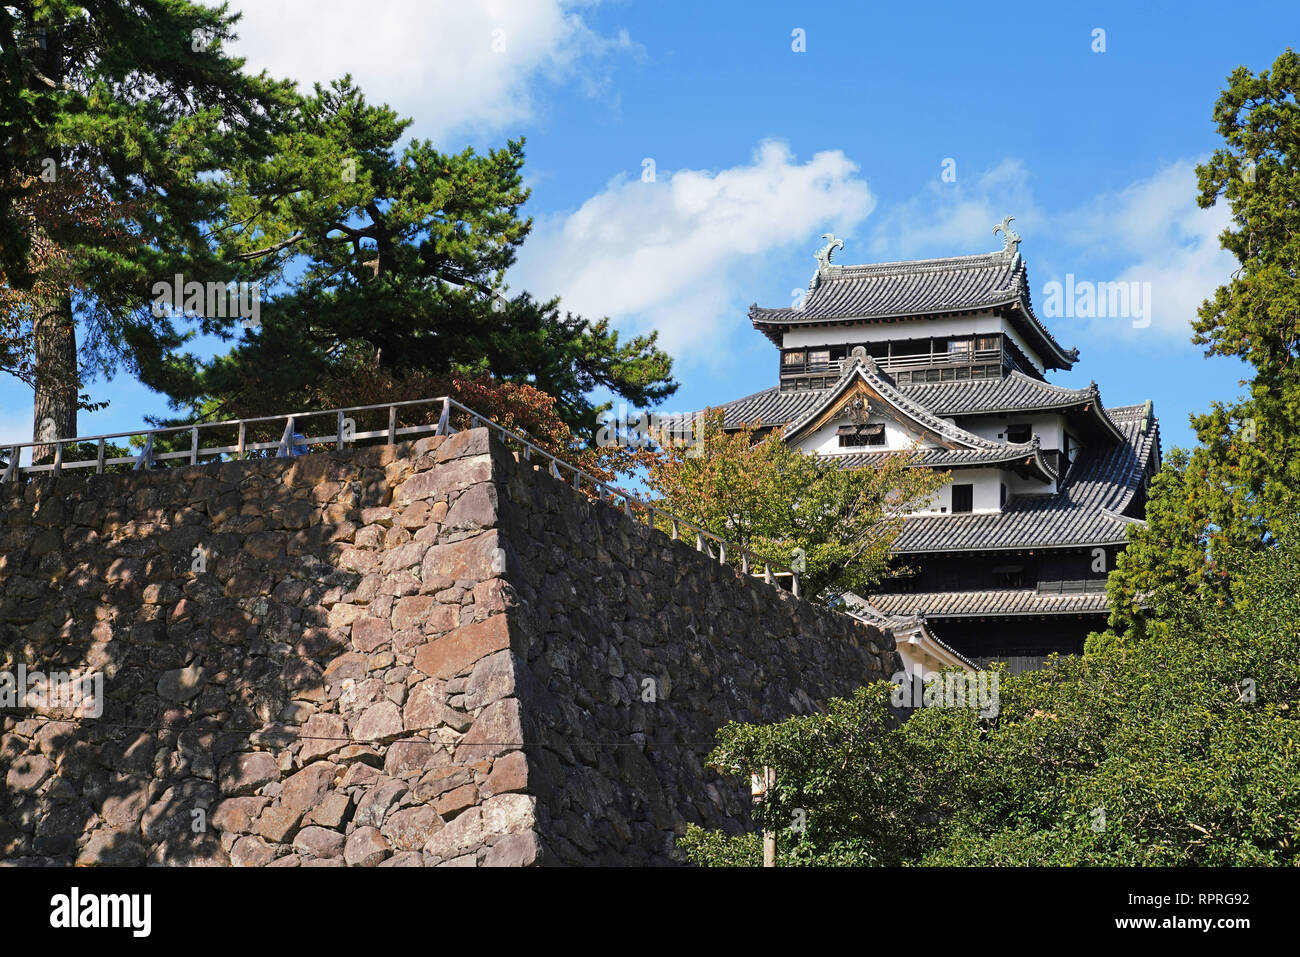 Medieval Matsue Castle near Sakaiminato is feudal castle in original wooden form and not reconstructed. Stock Photo